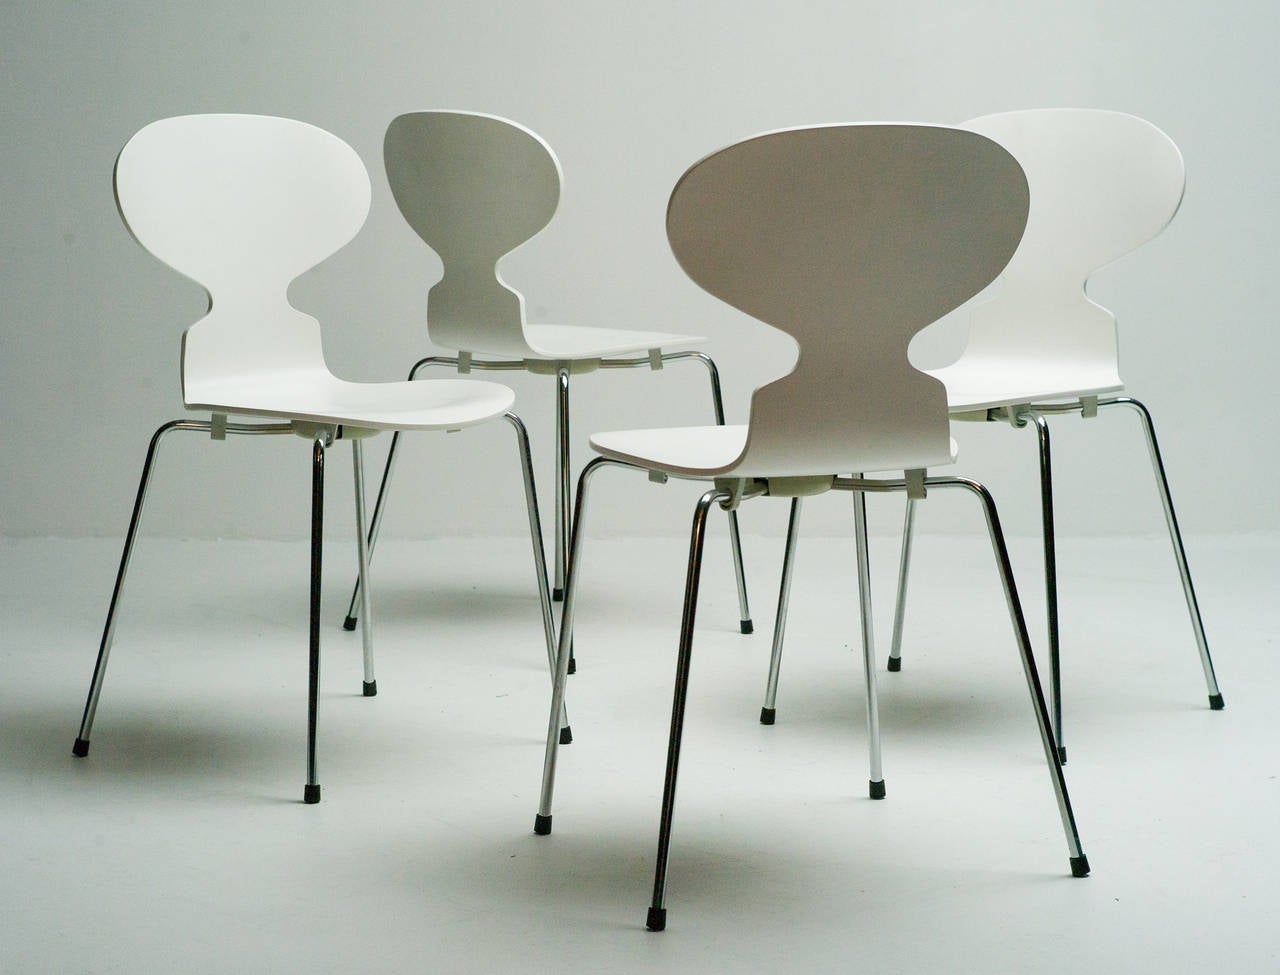 Lacquered Table Model 3600 and Four 3101 Chairs by Arne Jacobsen